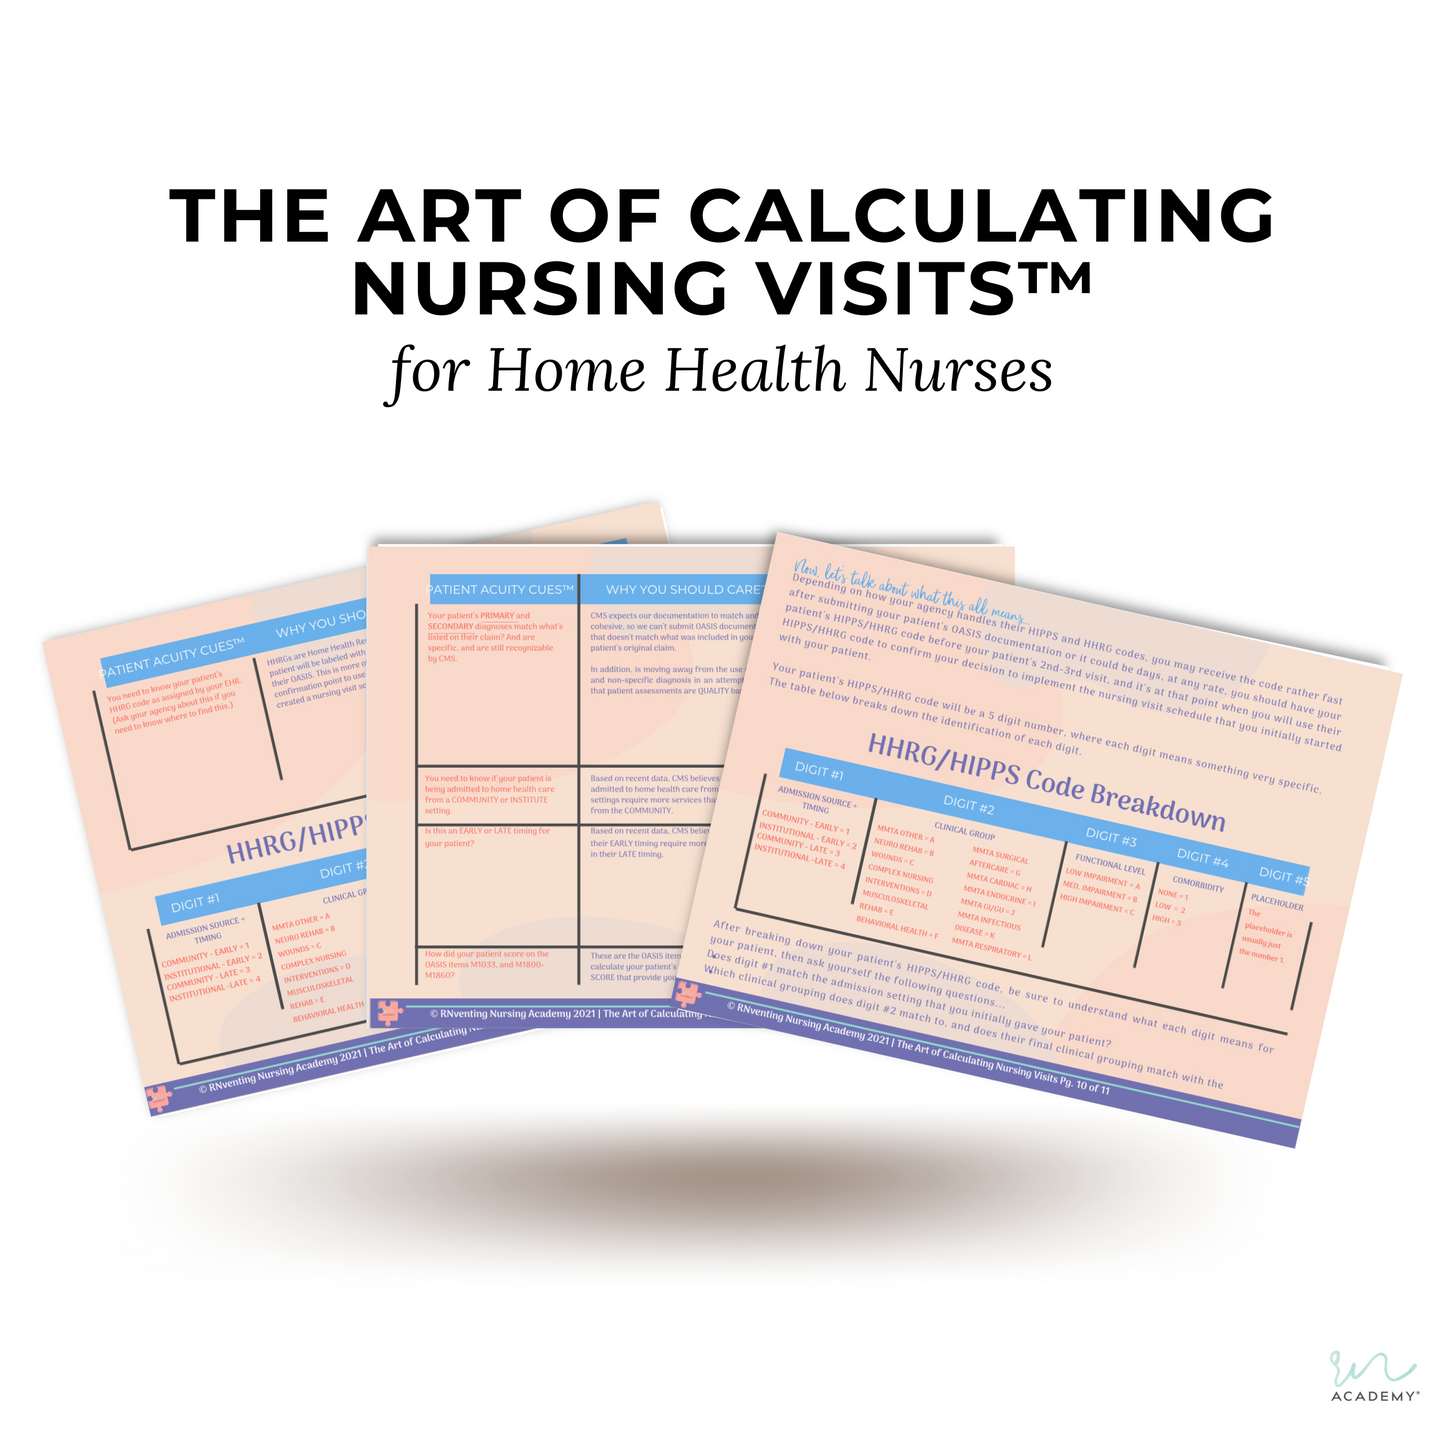 The Art of Calculating Nursing Visits™, Easy Answers for OASIS Functional and BIMS Scores™, and Nursing Visit Calculator Bundle